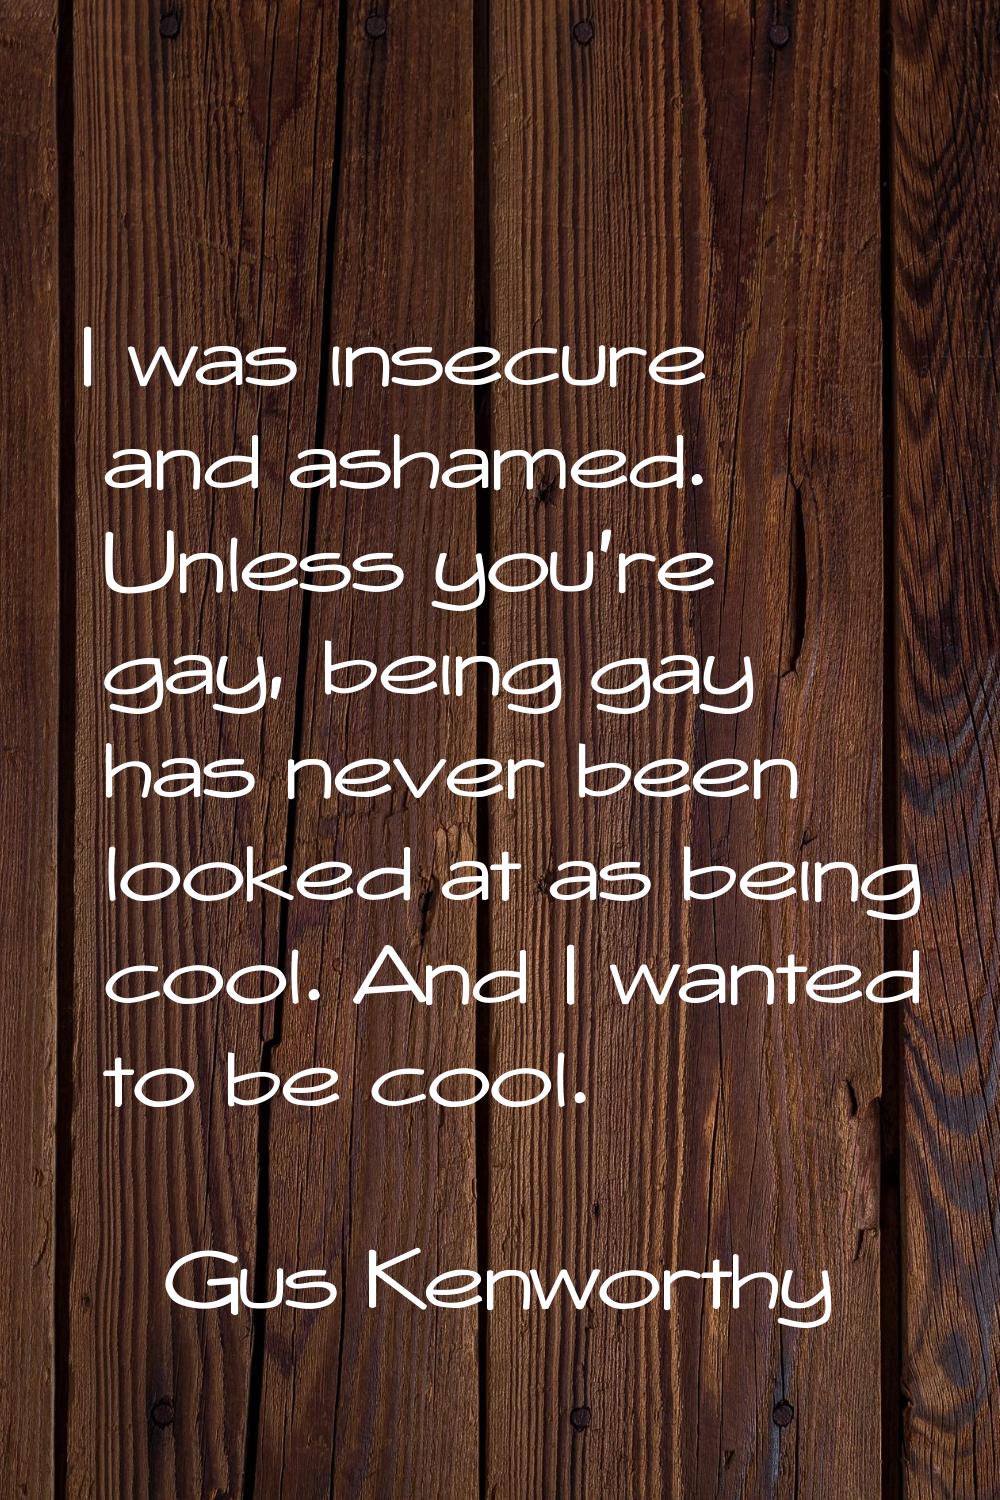 I was insecure and ashamed. Unless you're gay, being gay has never been looked at as being cool. An